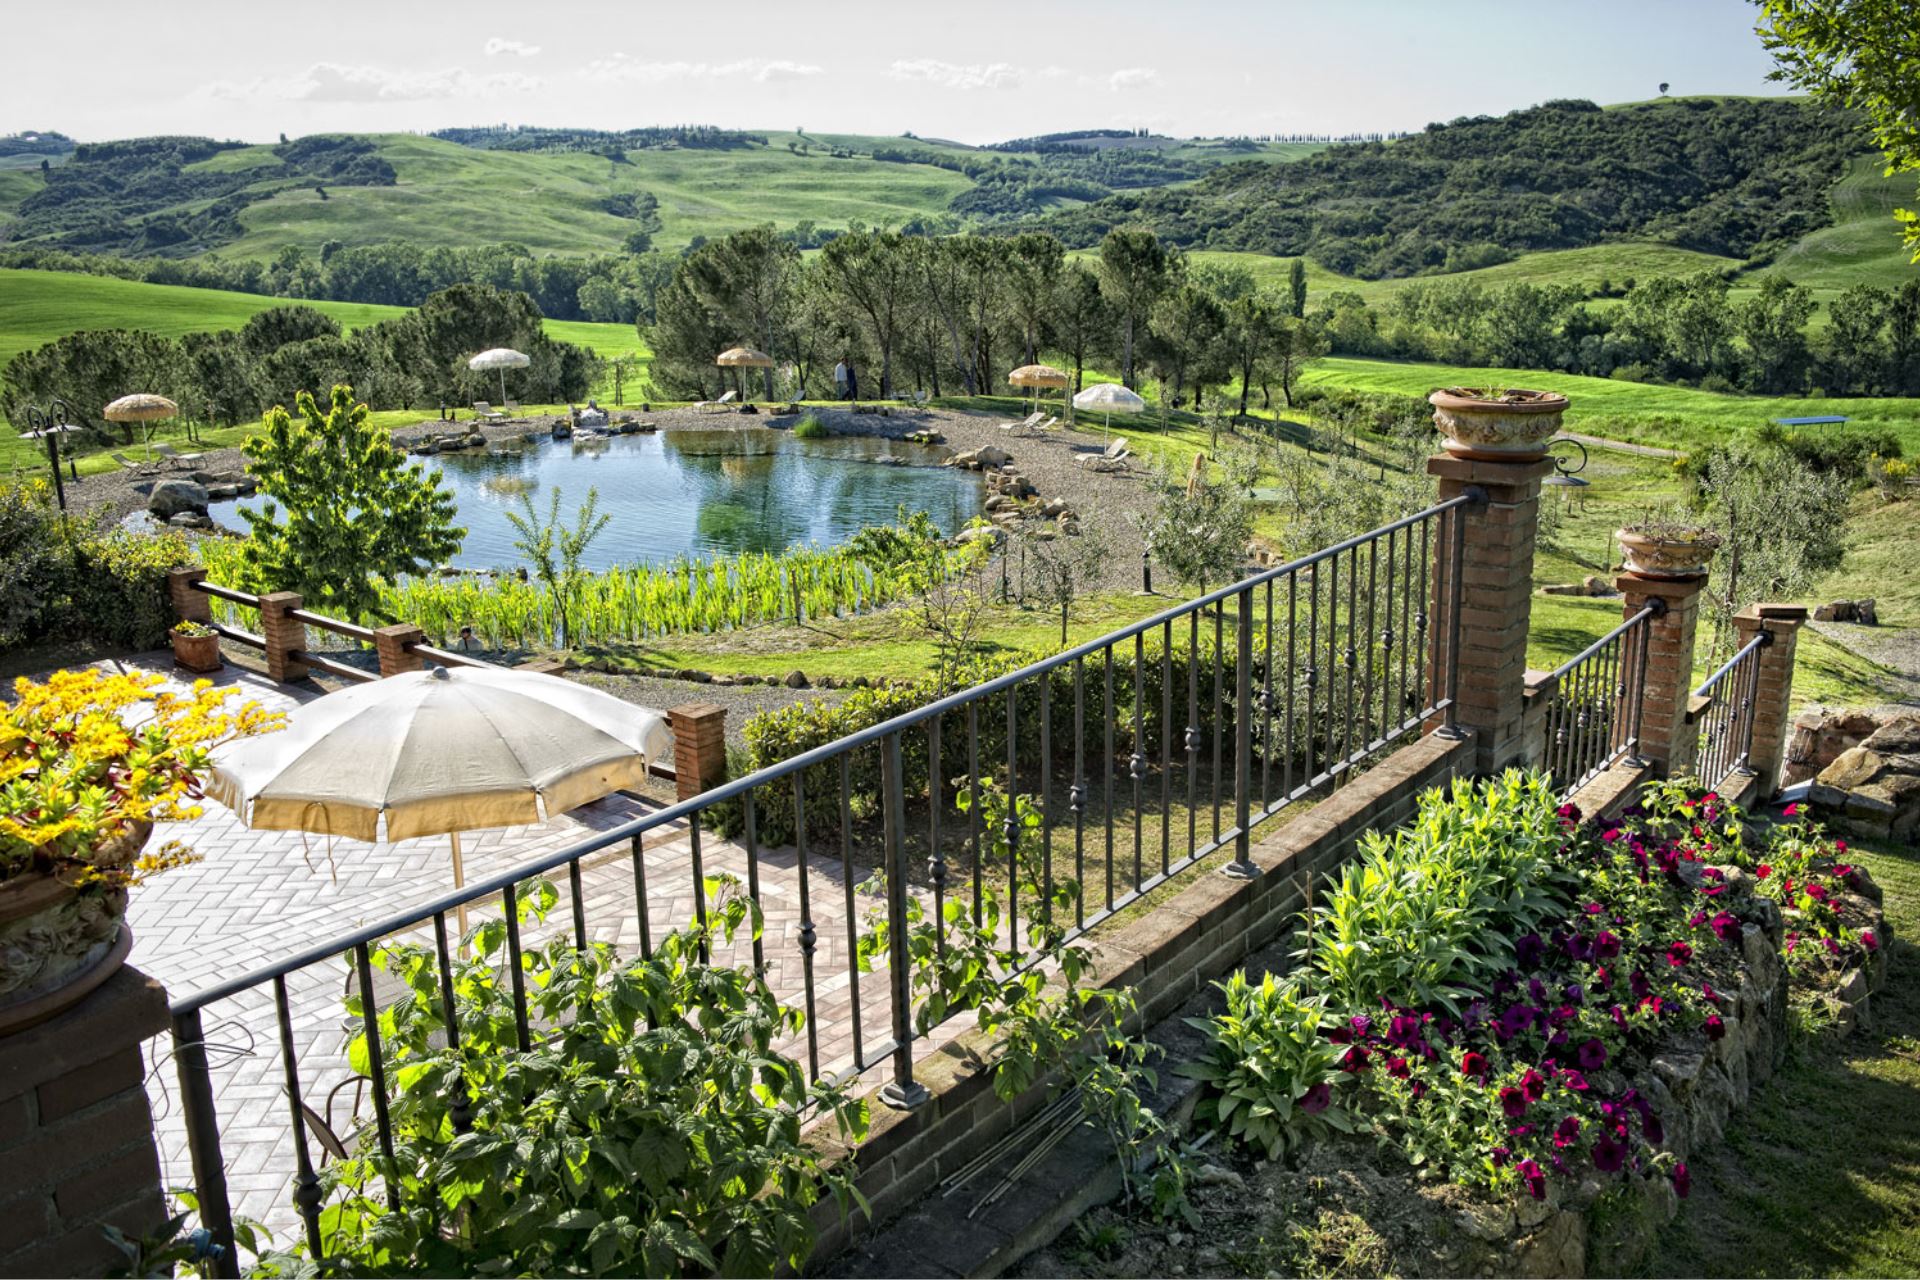 APARTMENTS WITH POOL LA GINESTRA SAN QUIRICO D'ORCIA TOSCANA